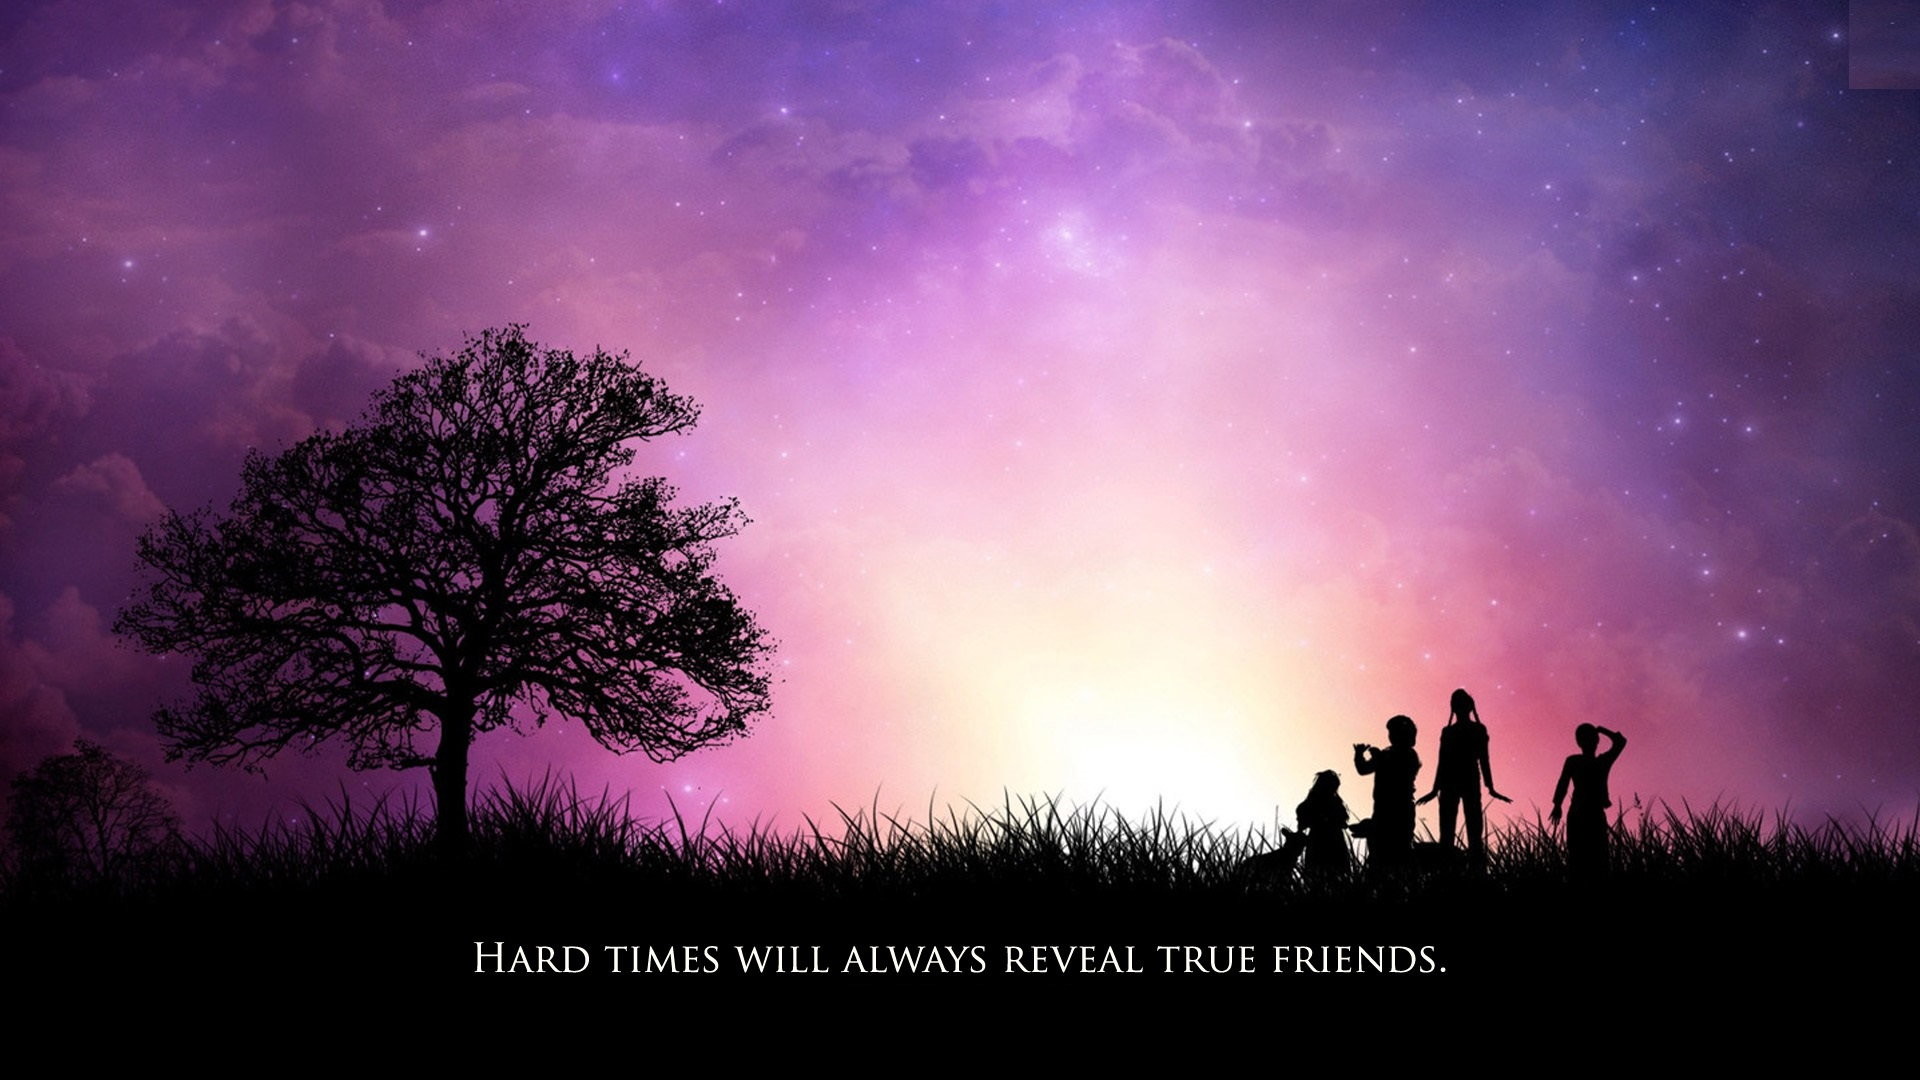 friends forever hd wallpapers,sky,people in nature,nature,purple,atmospheric phenomenon